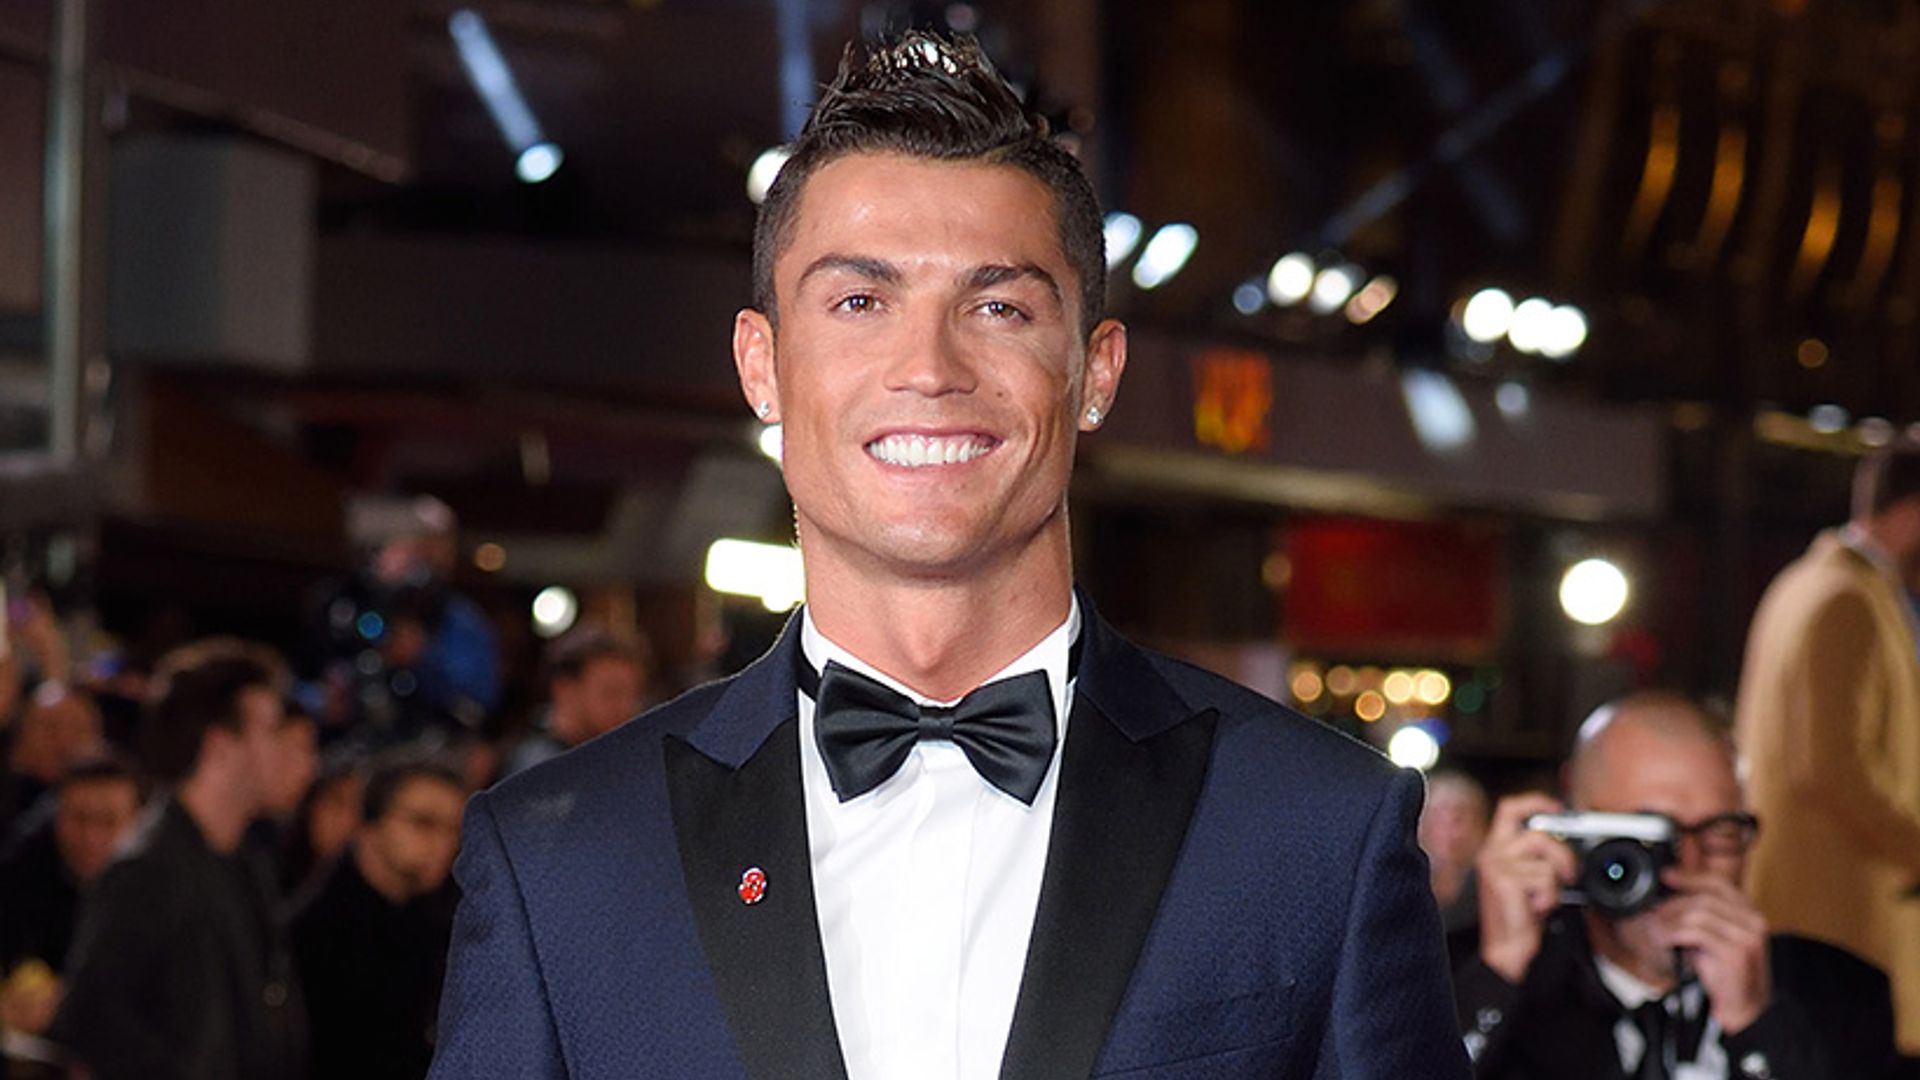 Cristiano Ronaldo pays moving tribute to his father with sweet family photo